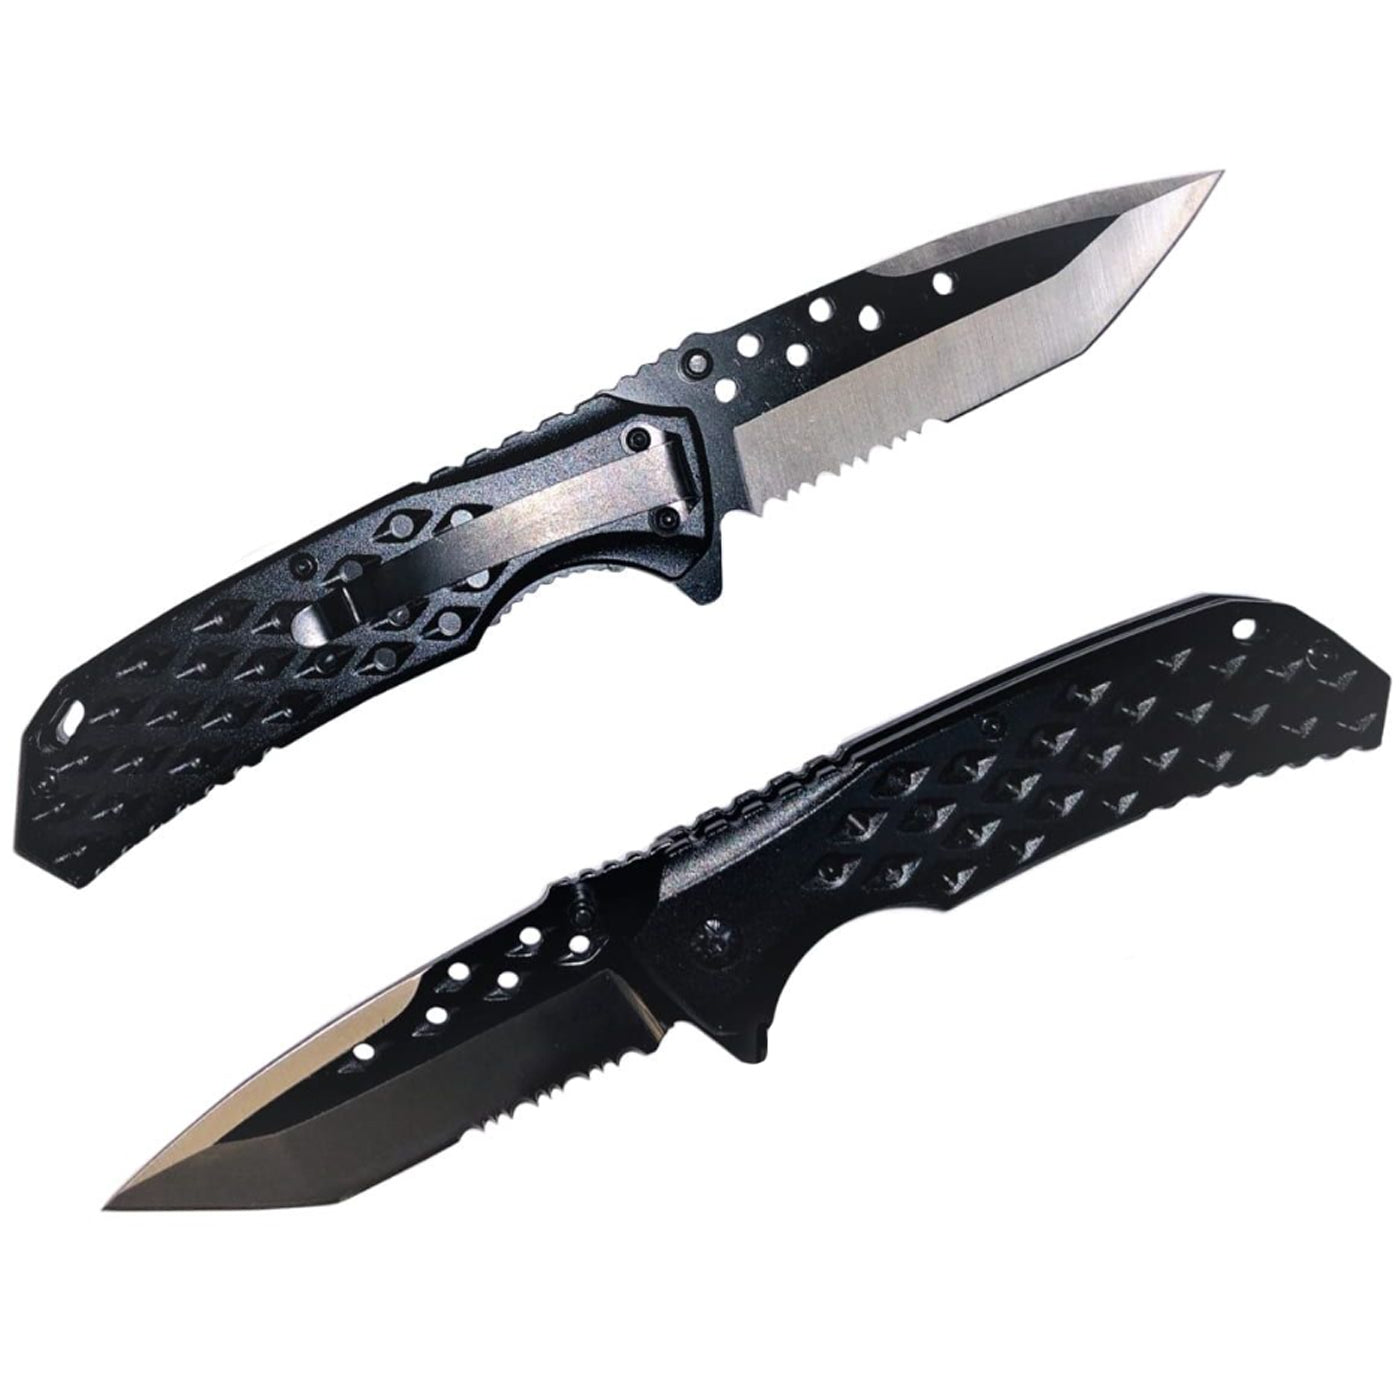 TX 8″ GRAY HUNTING COMBAT TACTICAL SPRING ASSISTED FOLDING KNIFE